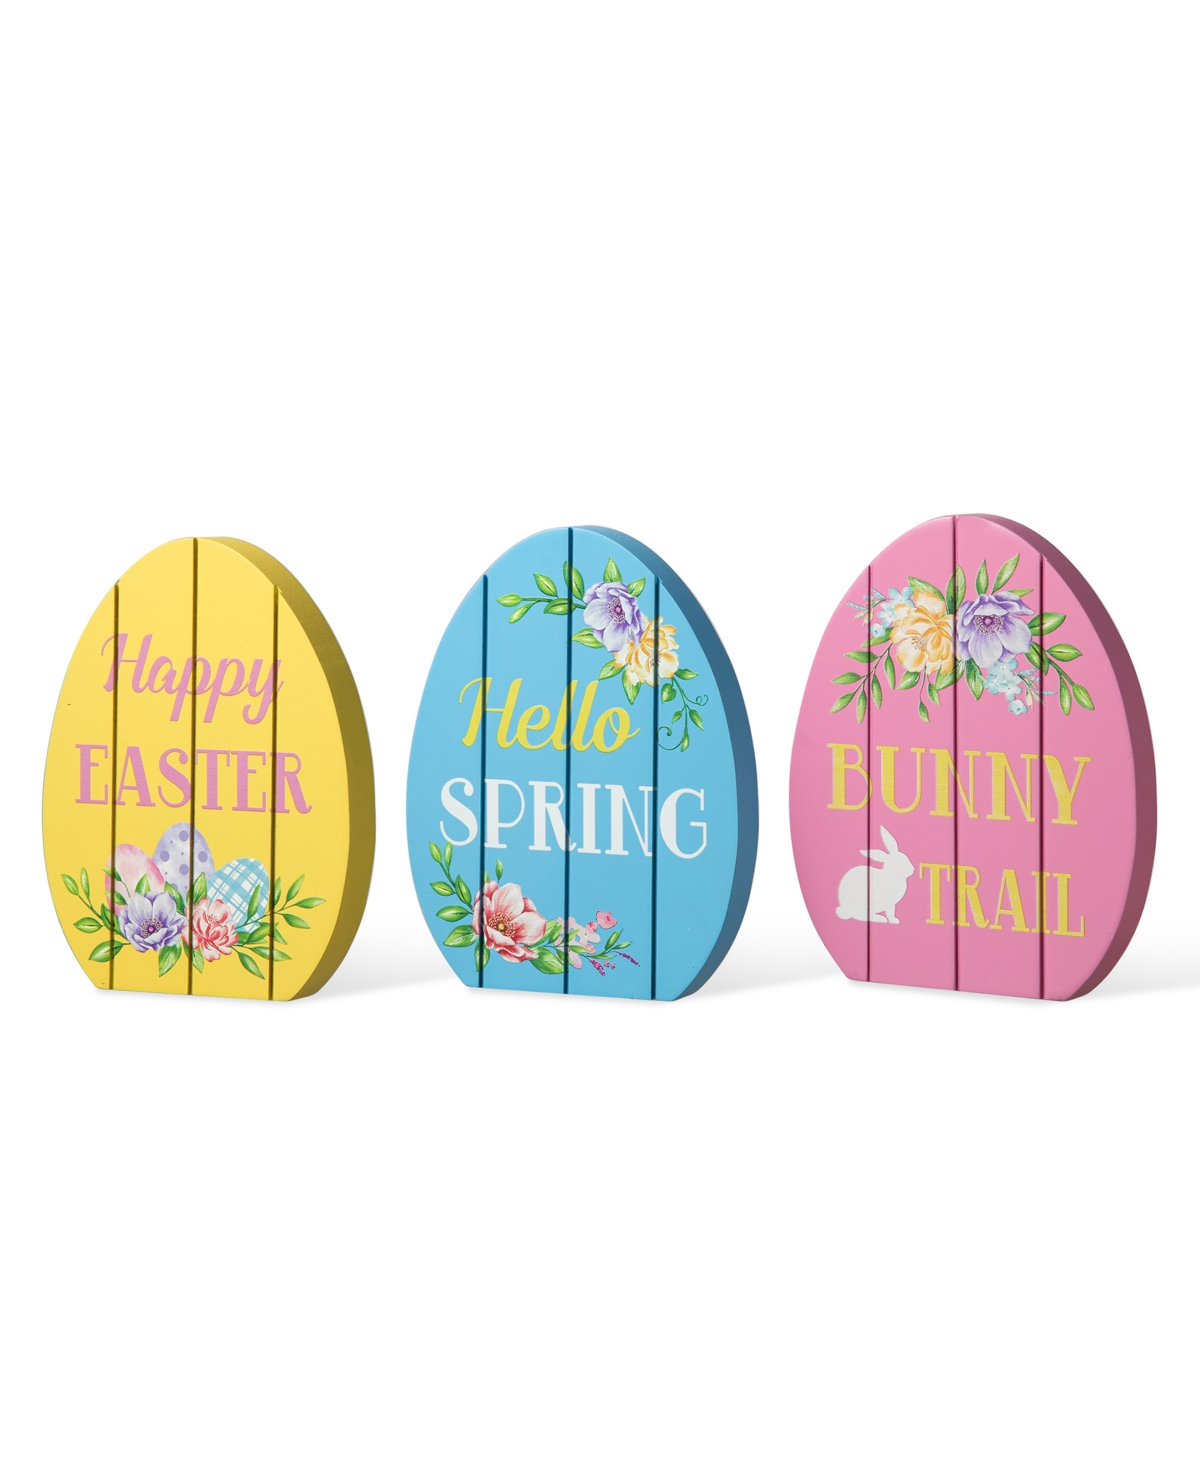 Glitzhome 7.5" H Easter Wooden Easter Egg Table Decor, Set Of 3 In Multi